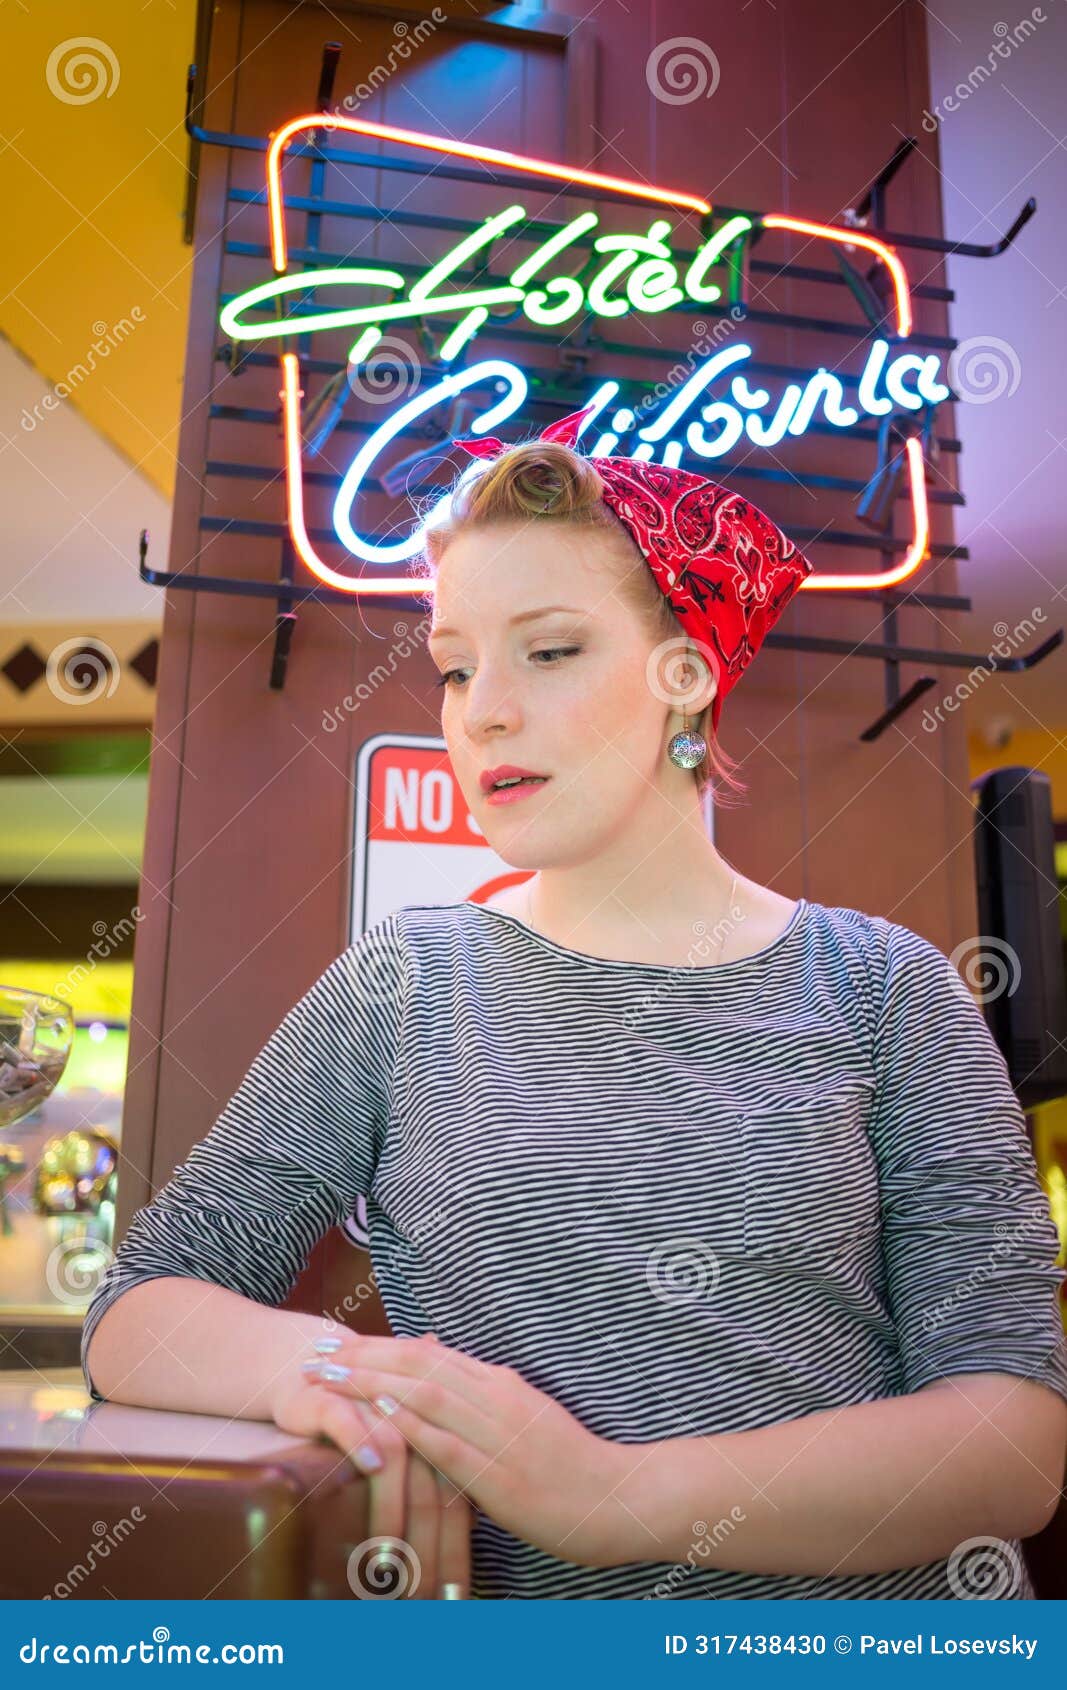 young girl in striped vest near neon signboard in